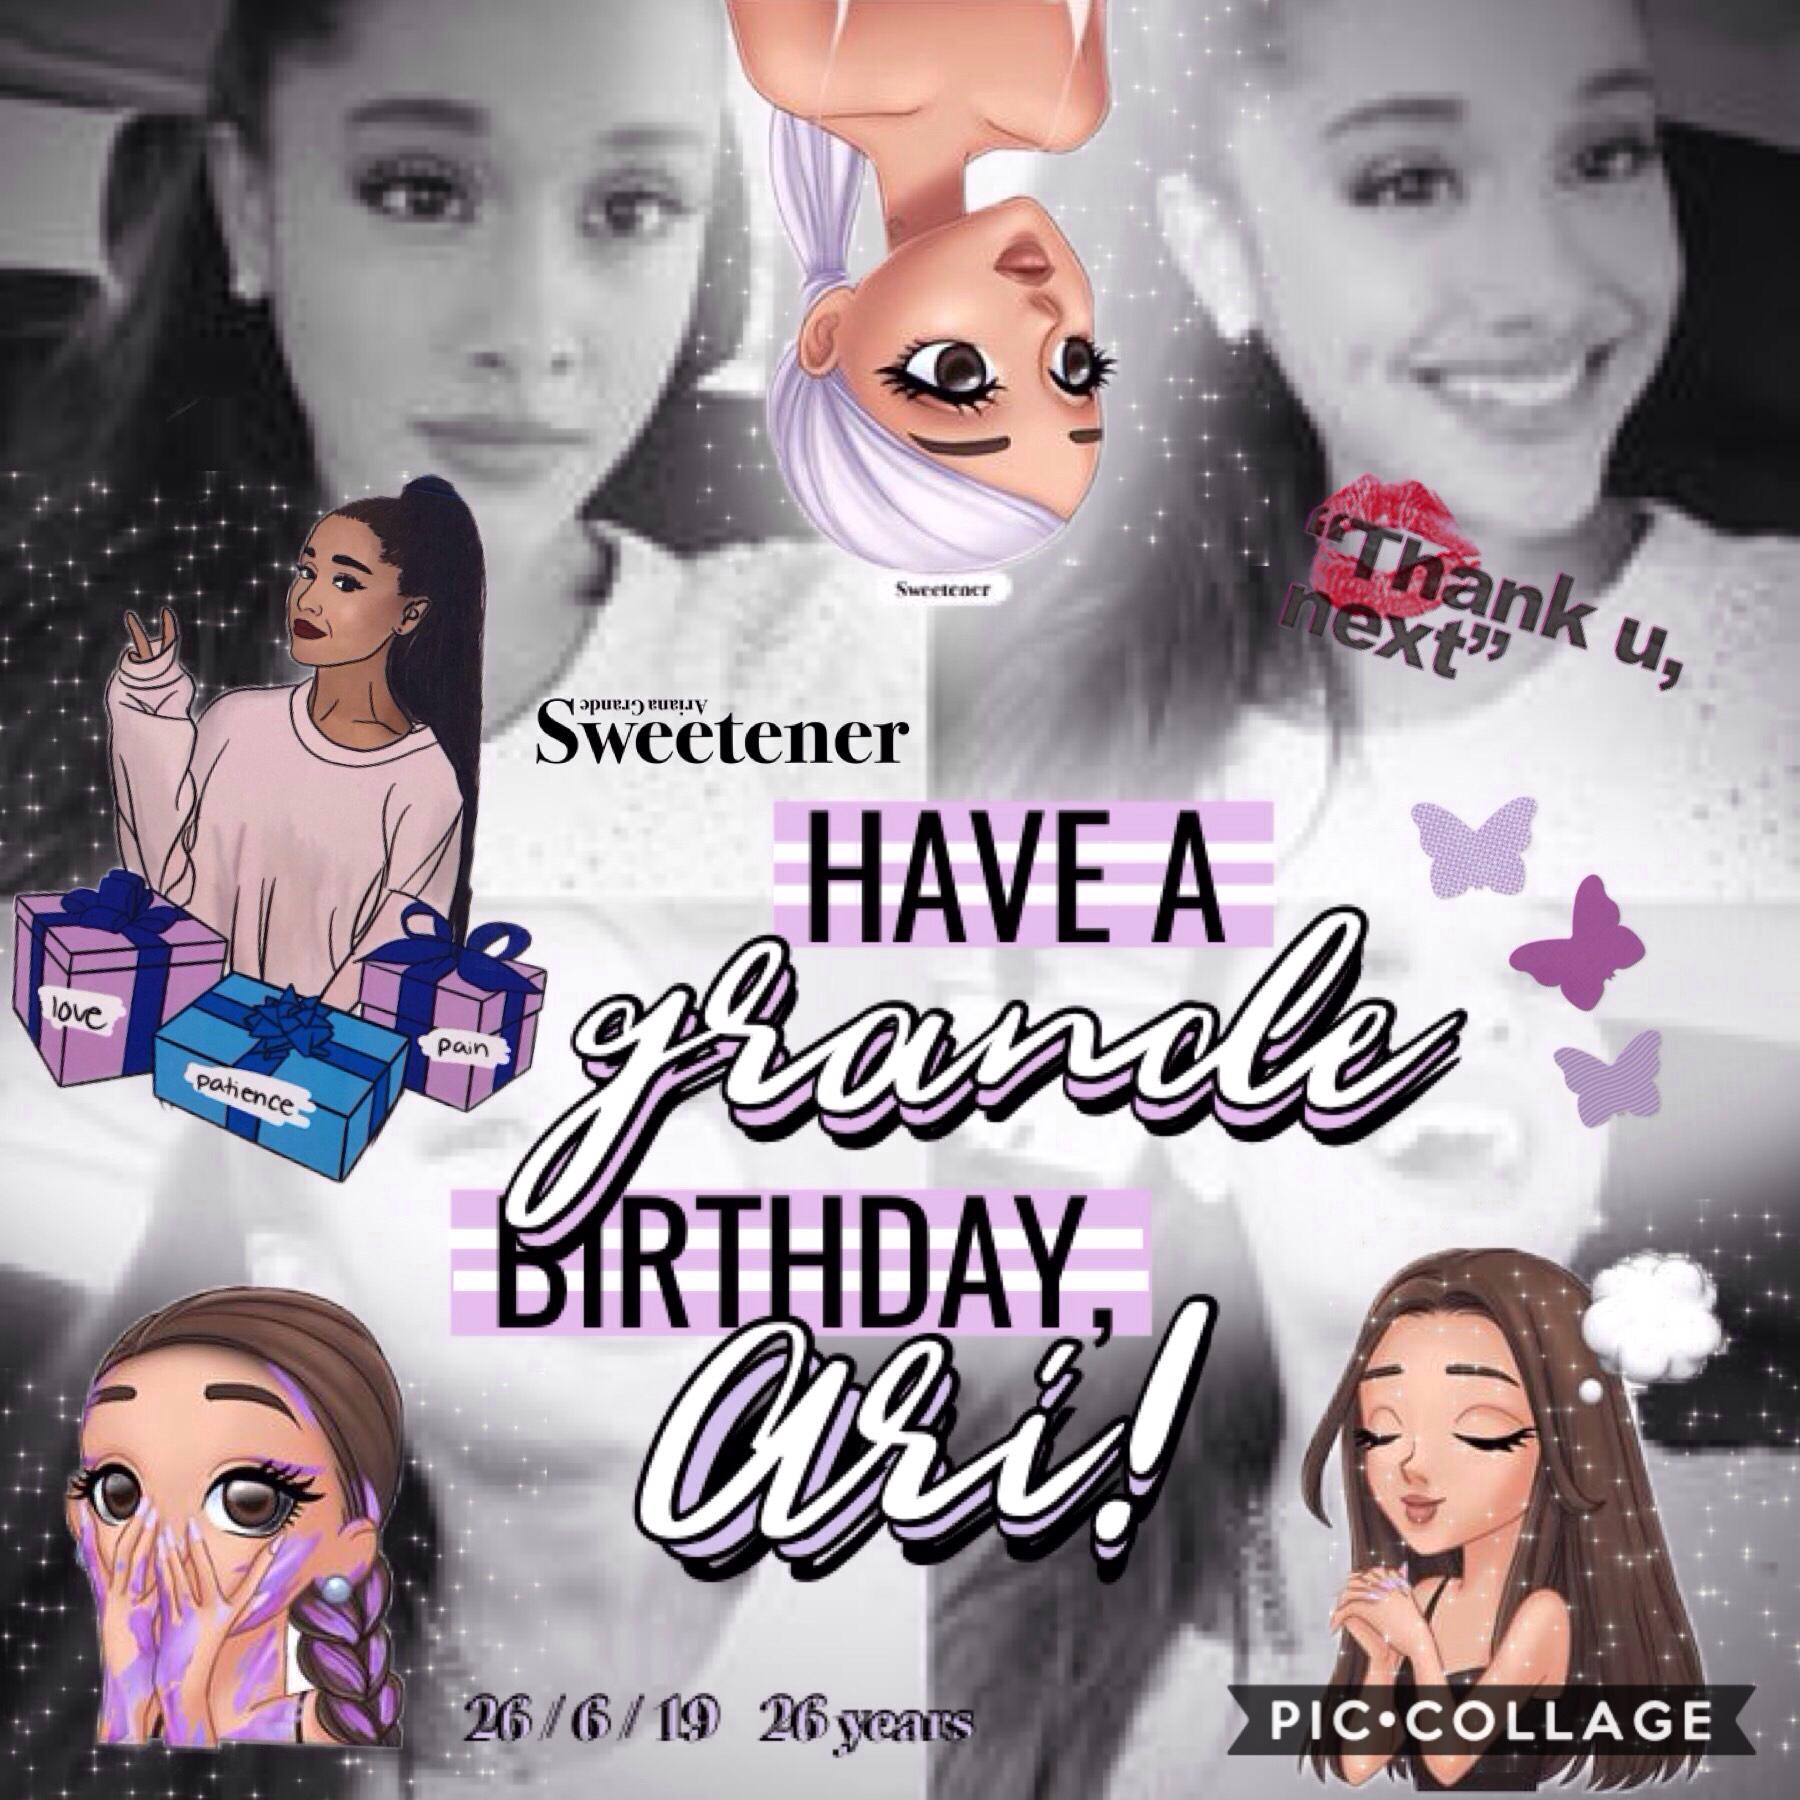 ☁️Happy Birthday, Ari!!!🎉thank you for being such an ✨inspiration influencer ✨who makes me smile when I listen to your songs☺️🌈. you're an amazing, beautiful and talented woman and I hope you have a wonderful 26th bday!!! 
(ps this goes with my theme😆😜) 2